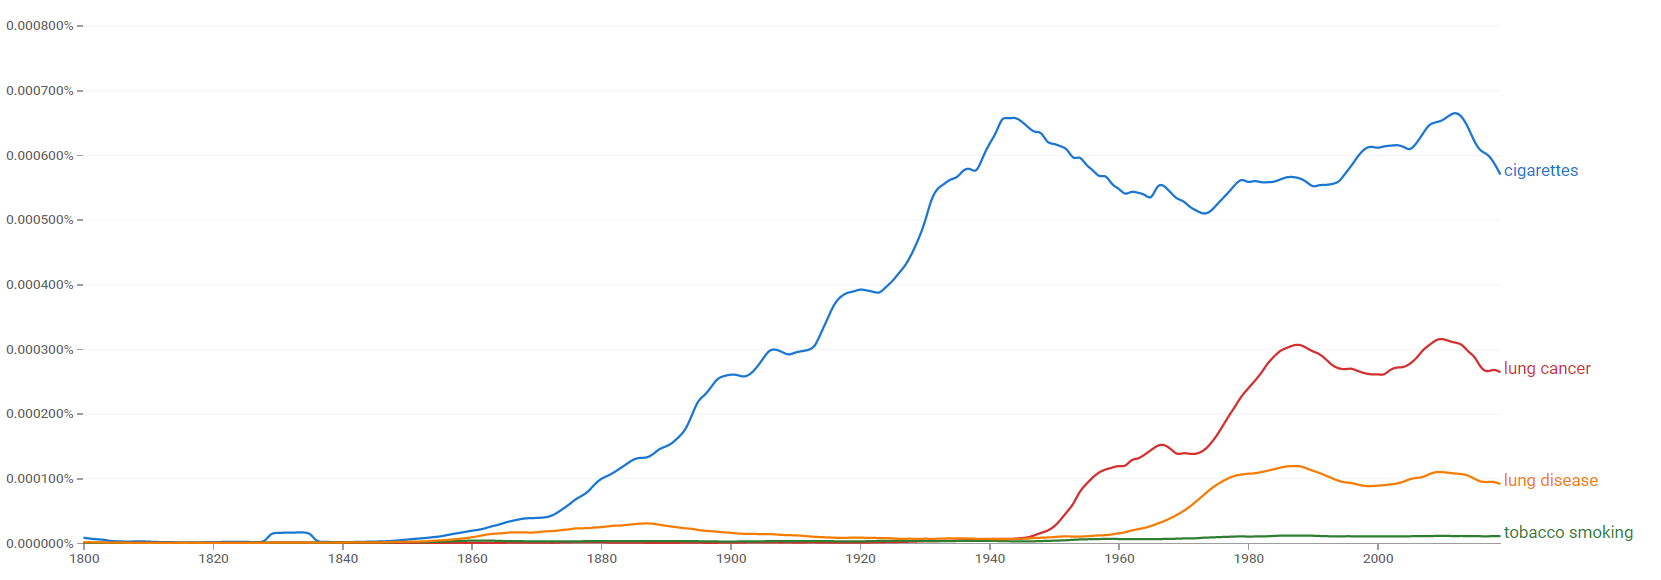 Cigarettes, lung cancer, tobacco smoking and lung disease ngram.png